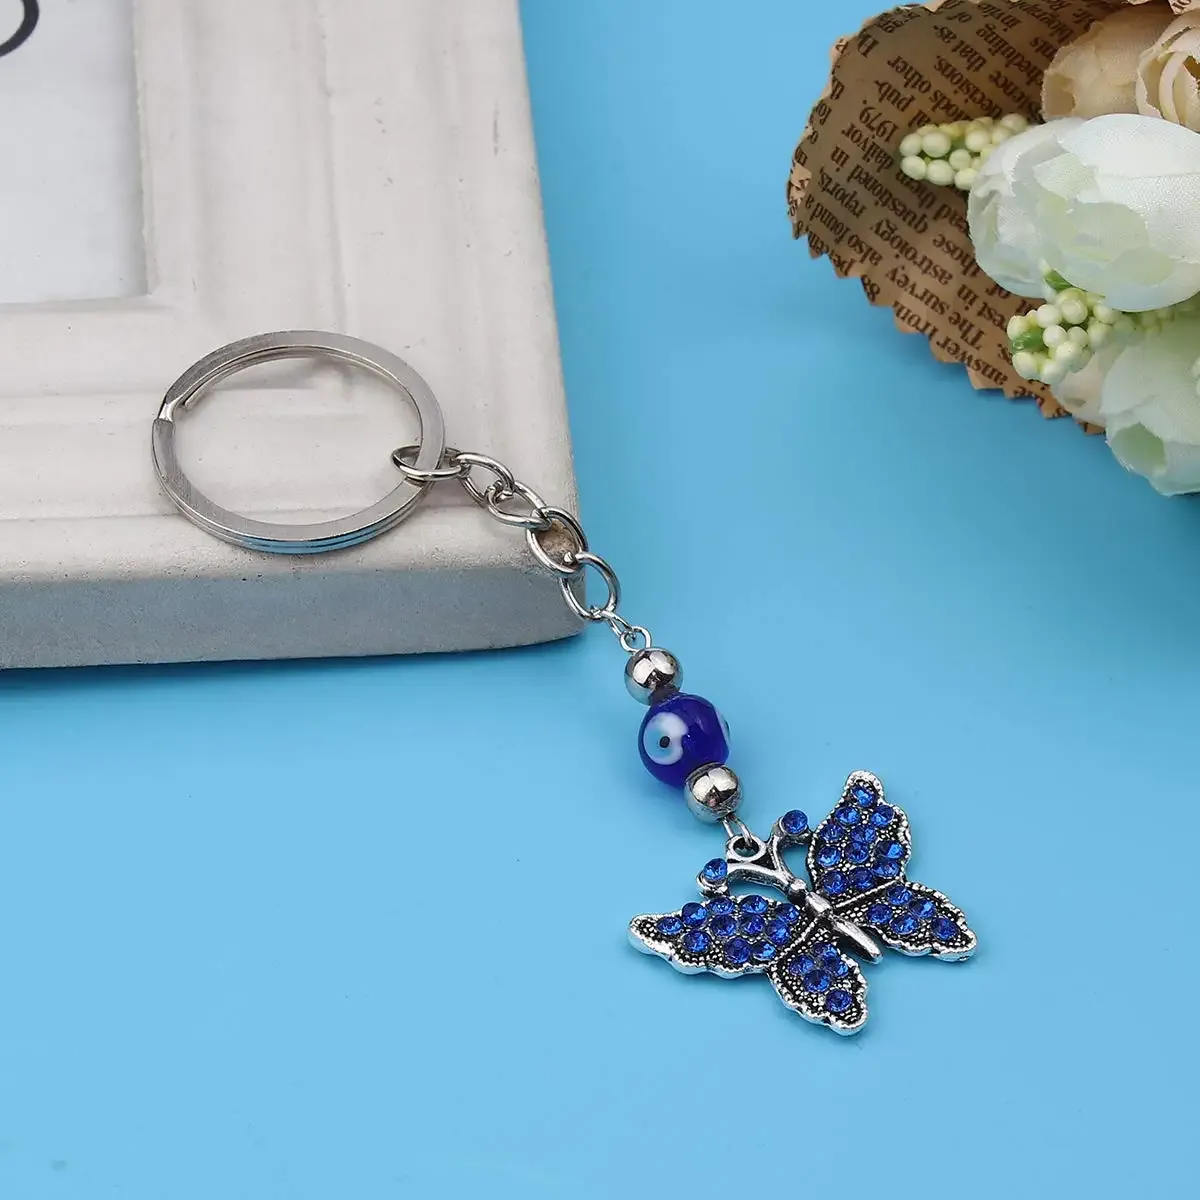 3ml turtle butterfly and elephant key chain set with nazars evil eye bead for protection on keychain good luck pocket charm keychains for women spiritual animal